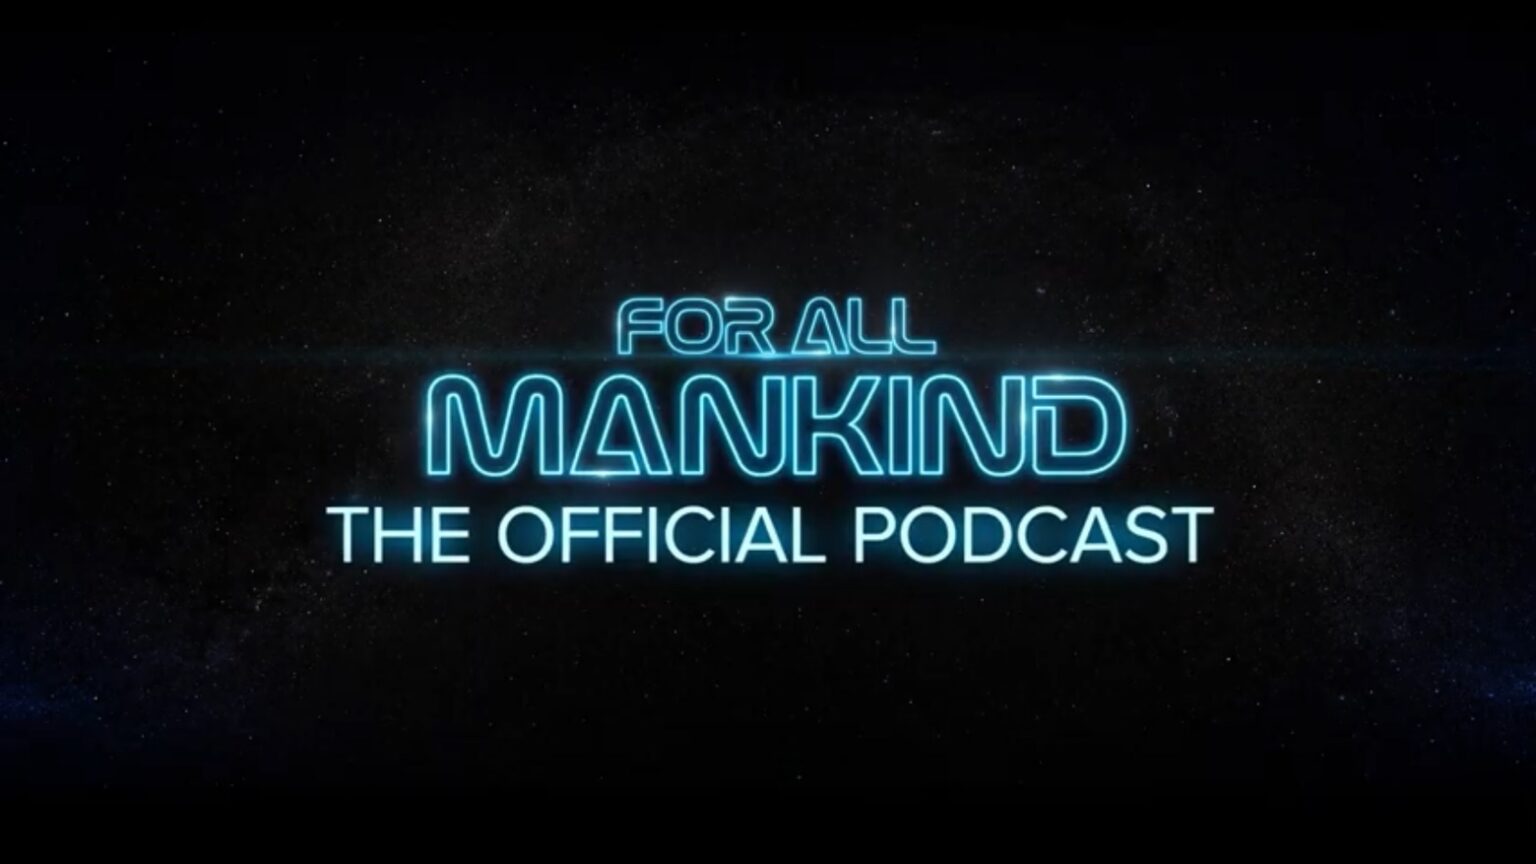 ‘For All Mankind: The Official Podcast’ debuted Friday on Apple Podcasts